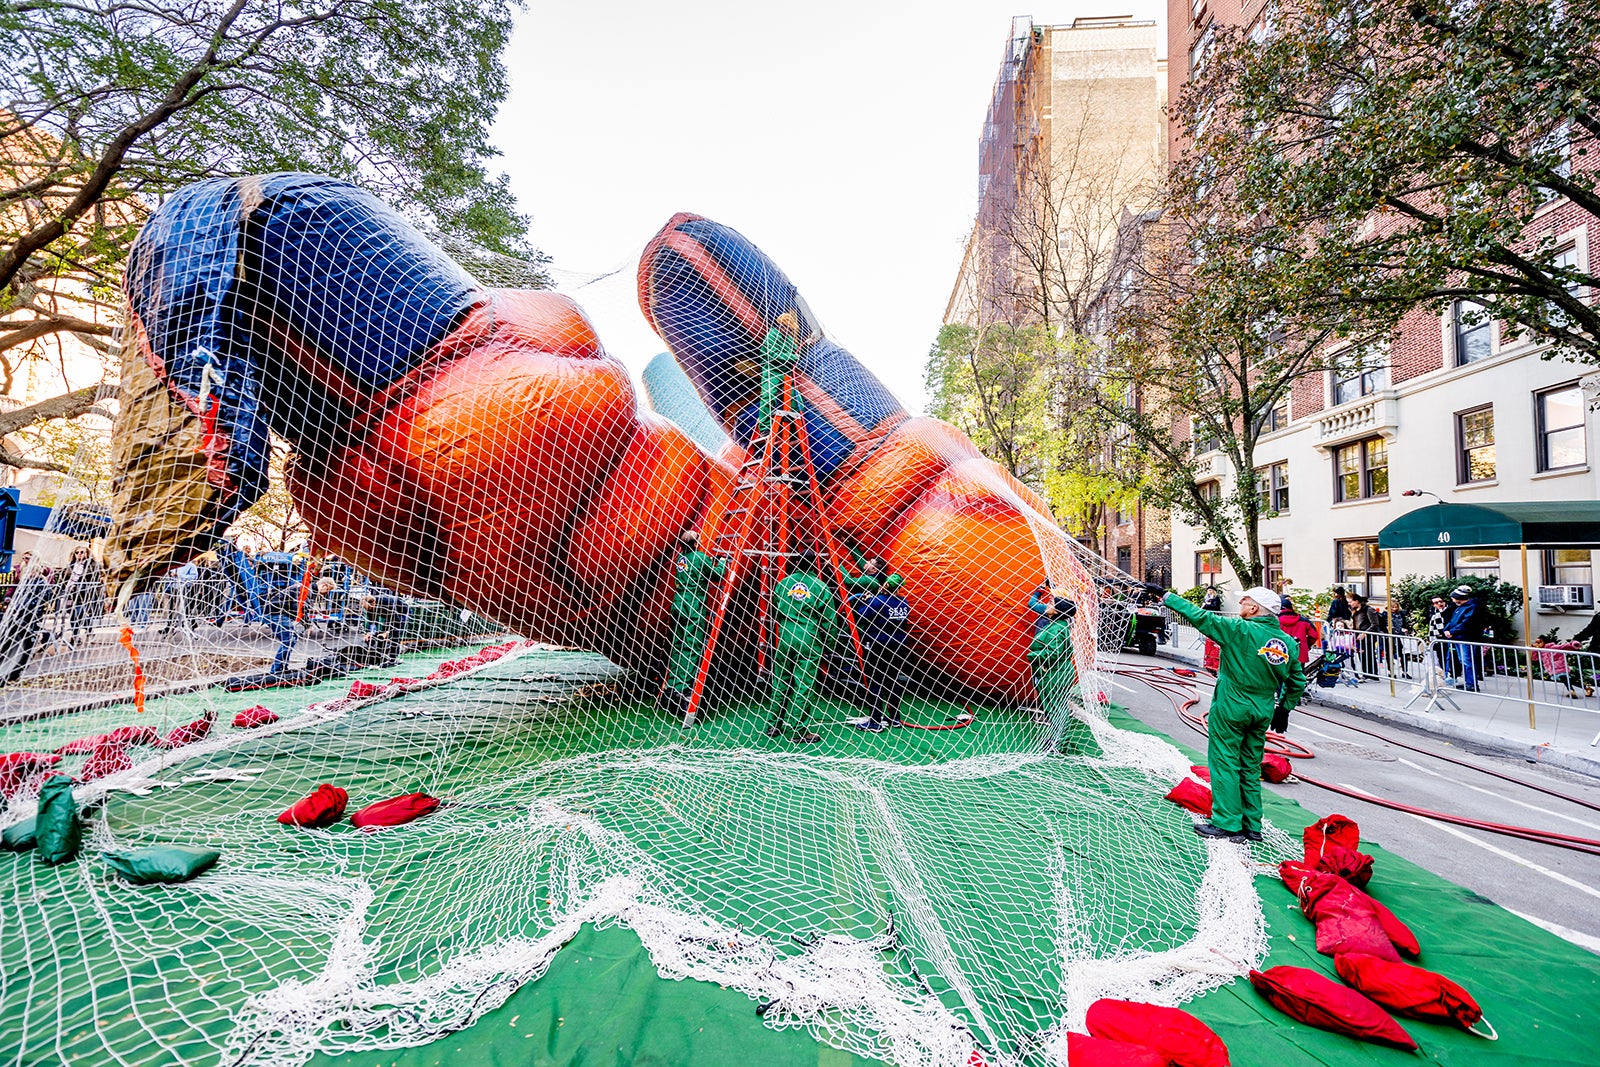 Dragon ball Z balloon being inflated at Central Park